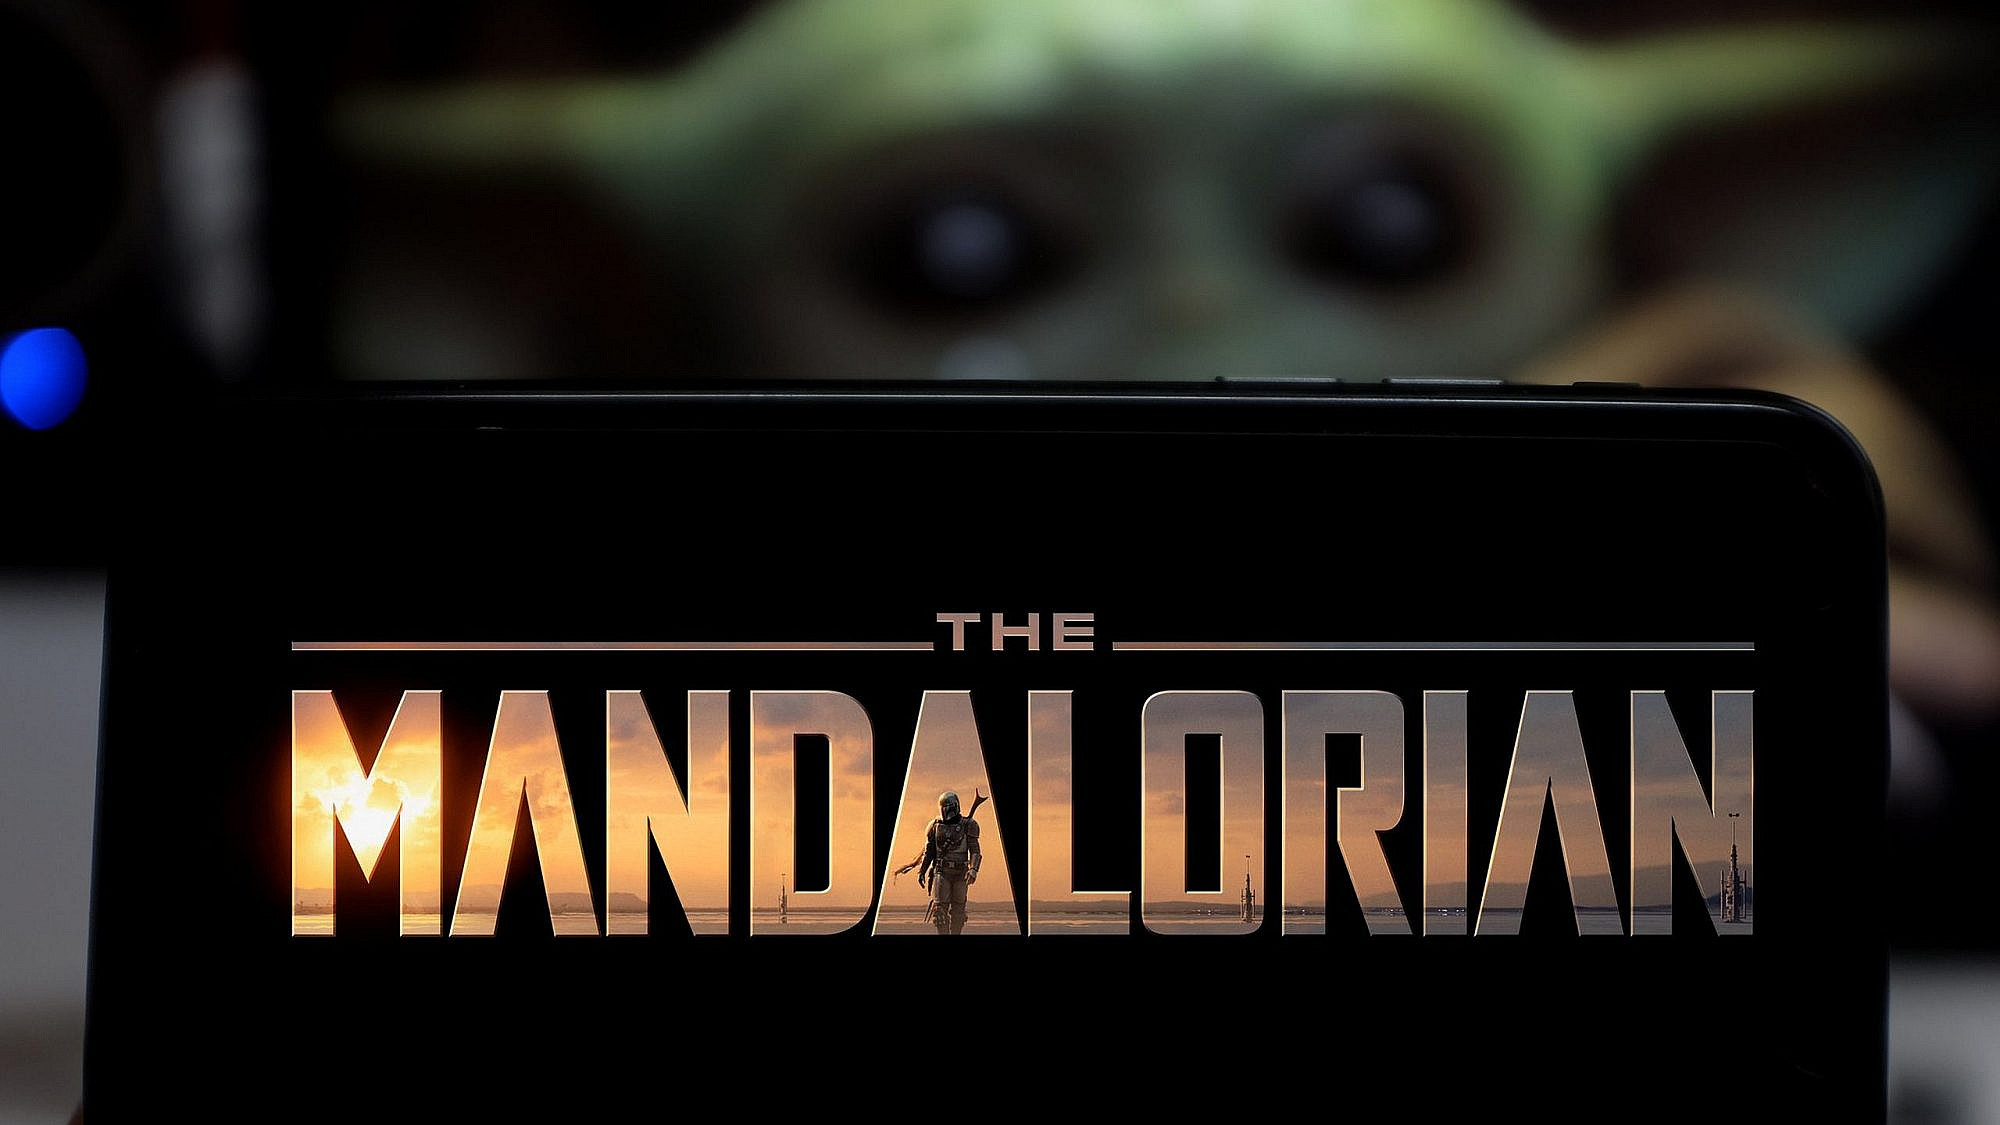 “The Mandalorian” logo smartphone based on a web television series. United States, Jan. 18, 2020. Credit: Daniel Constante/Shutterstock.